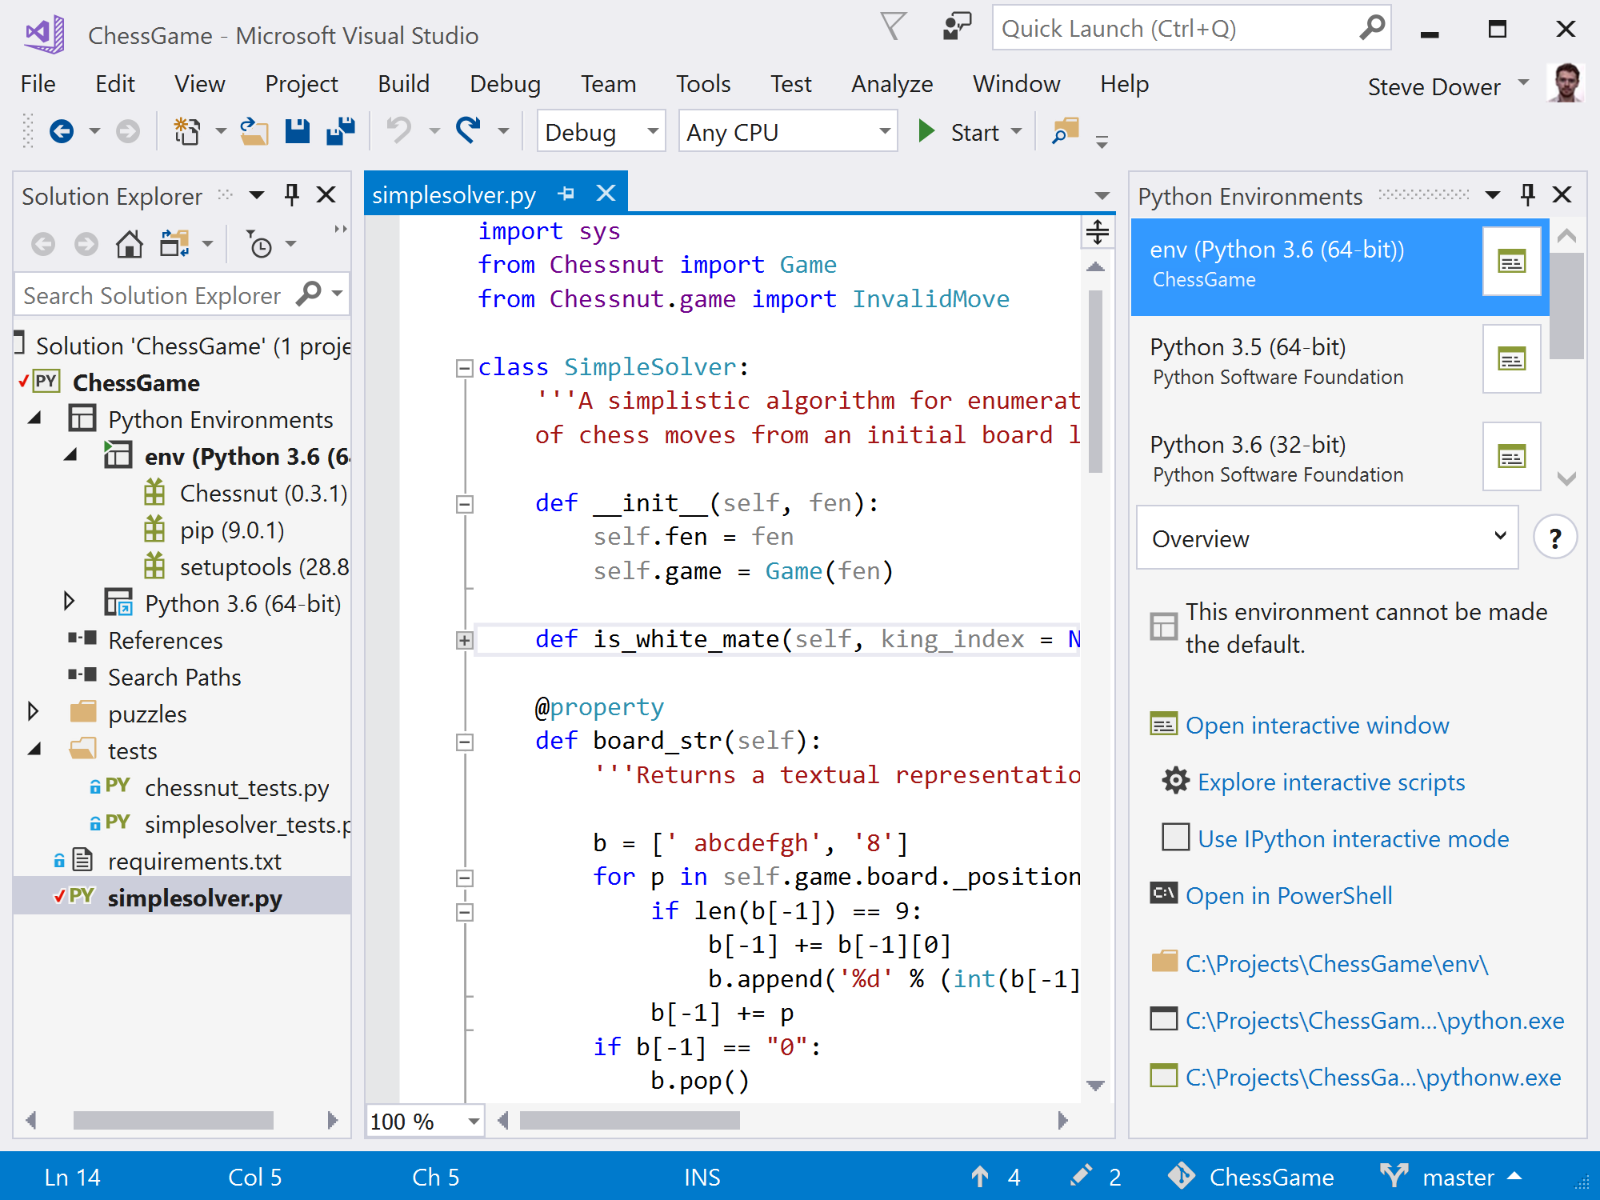 Released: Python support in Visual Studio 2017 - Python